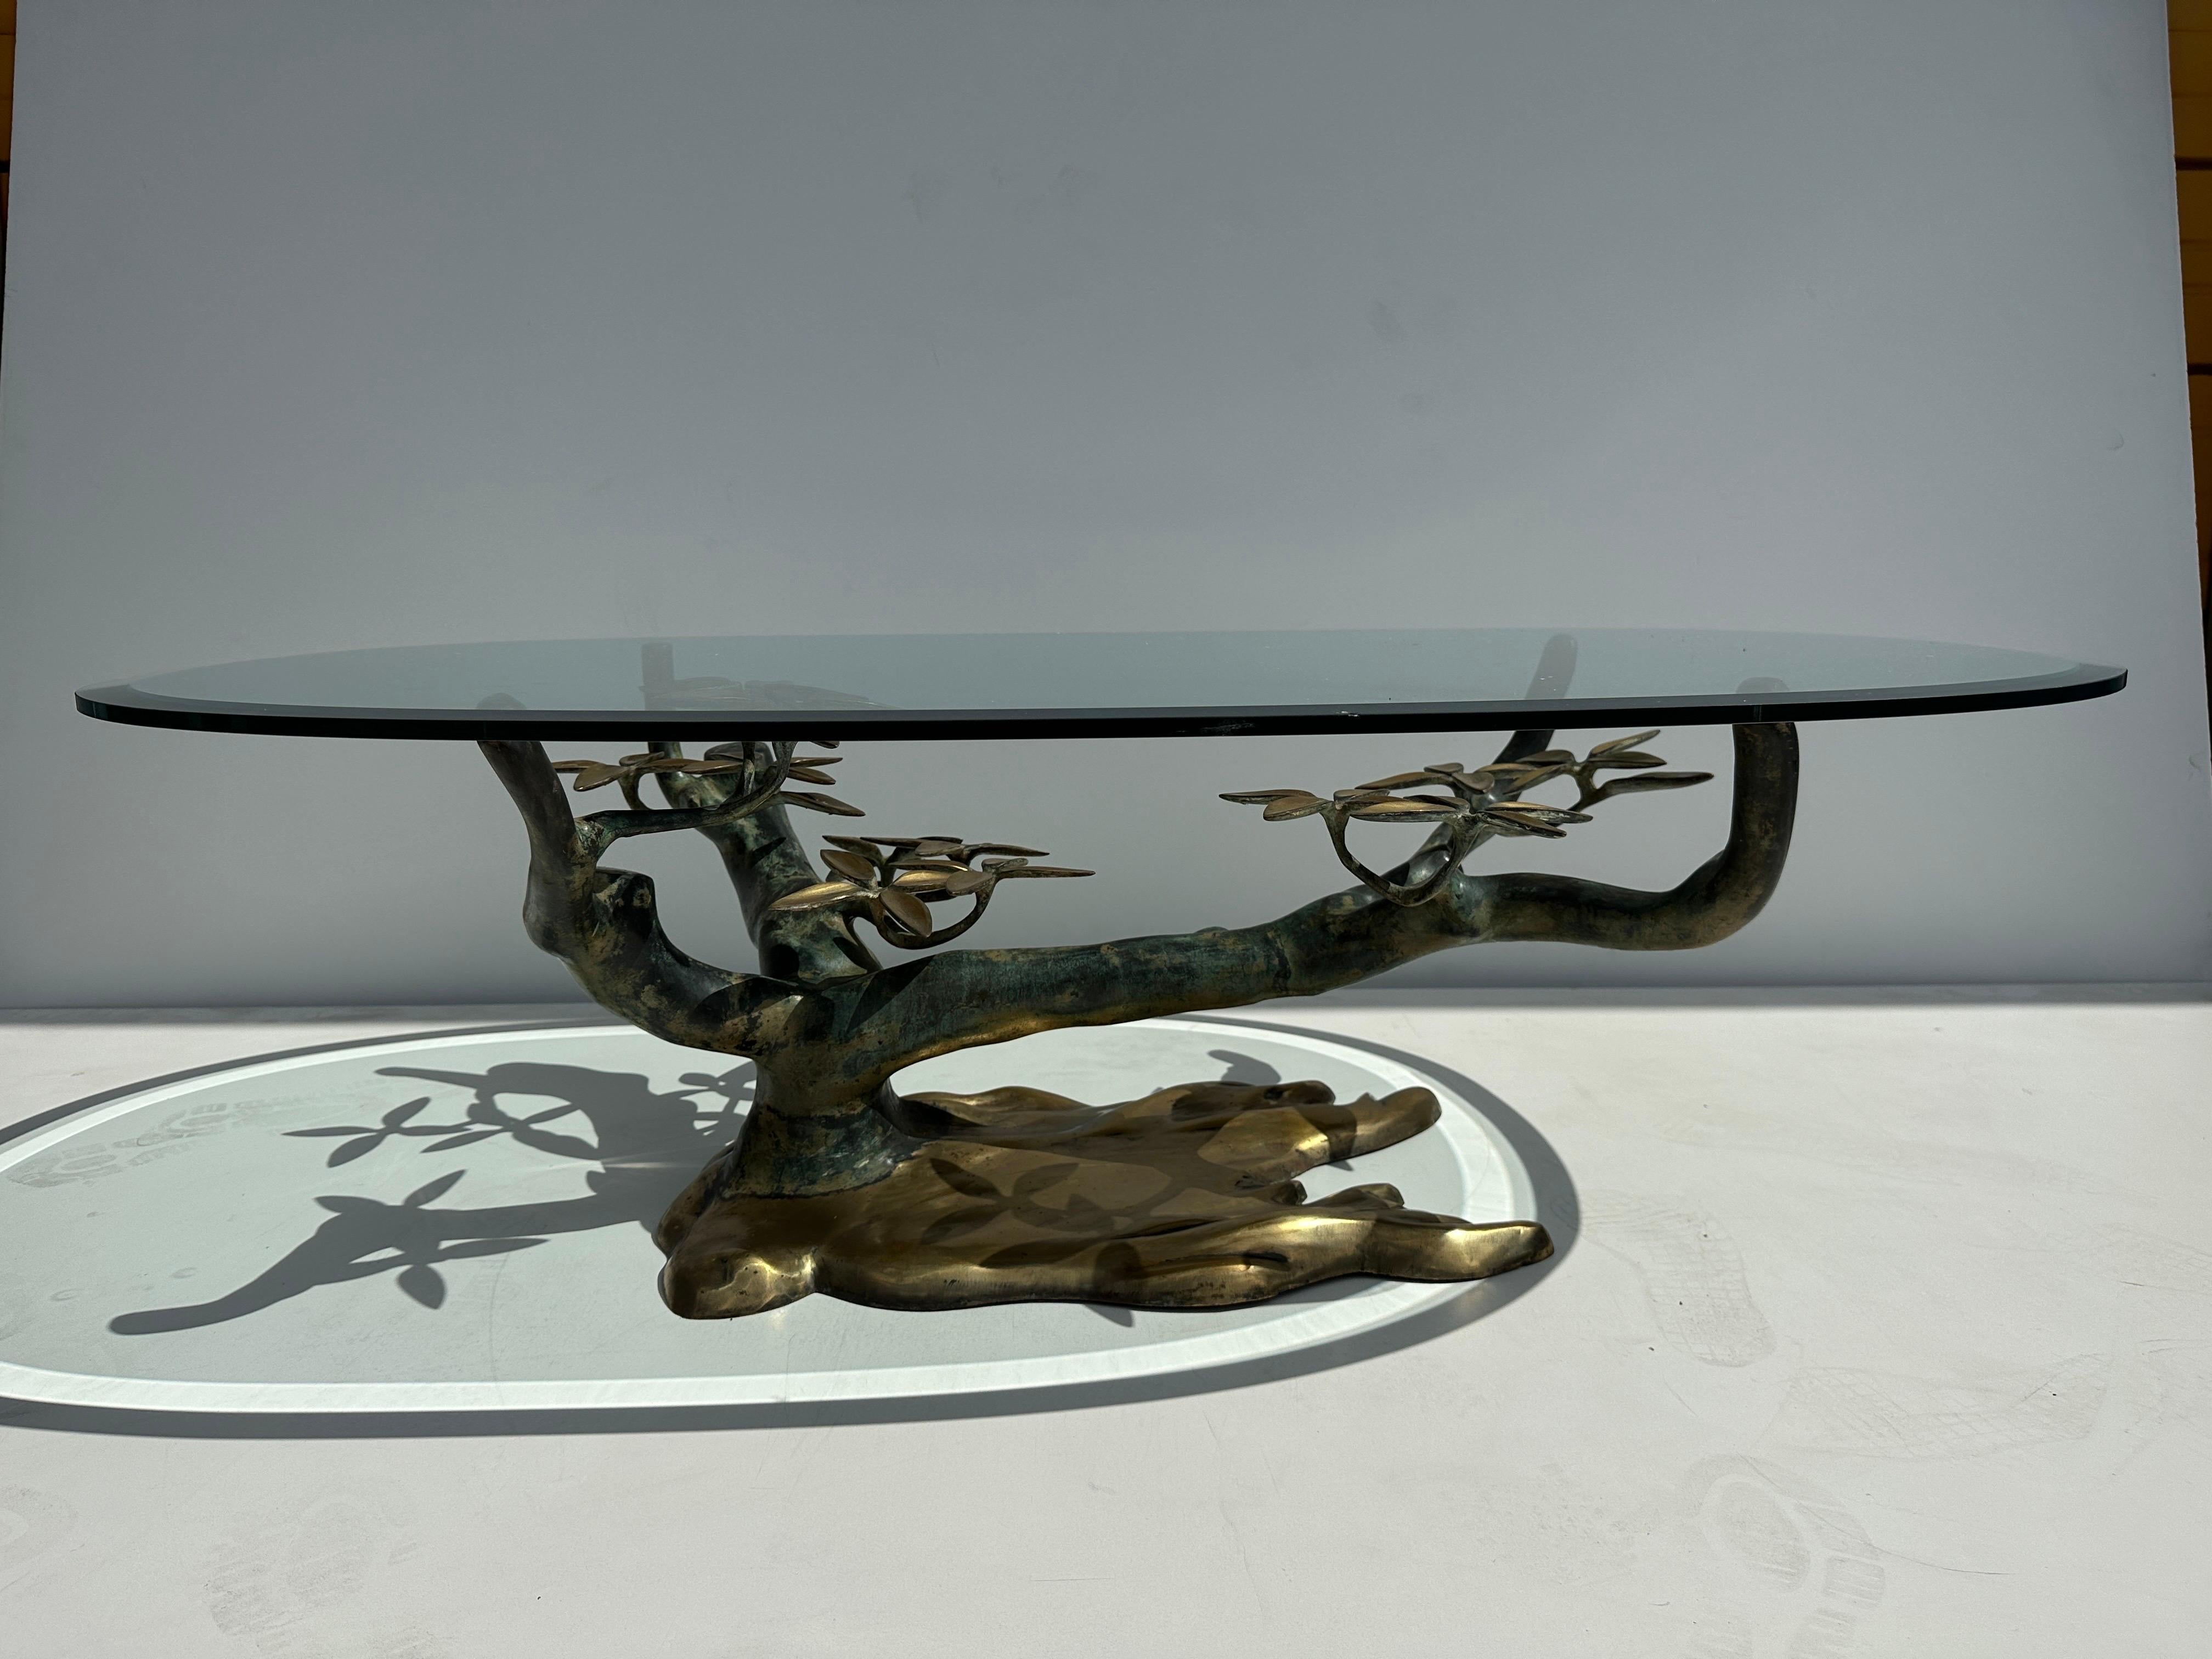 Willy Daro brass bonsai tree coffee table in two tone patina finish. Tree base is 36” x 24” and 15.5” high. Glass top is 51” x 32” and has a few tiny chips on edges.